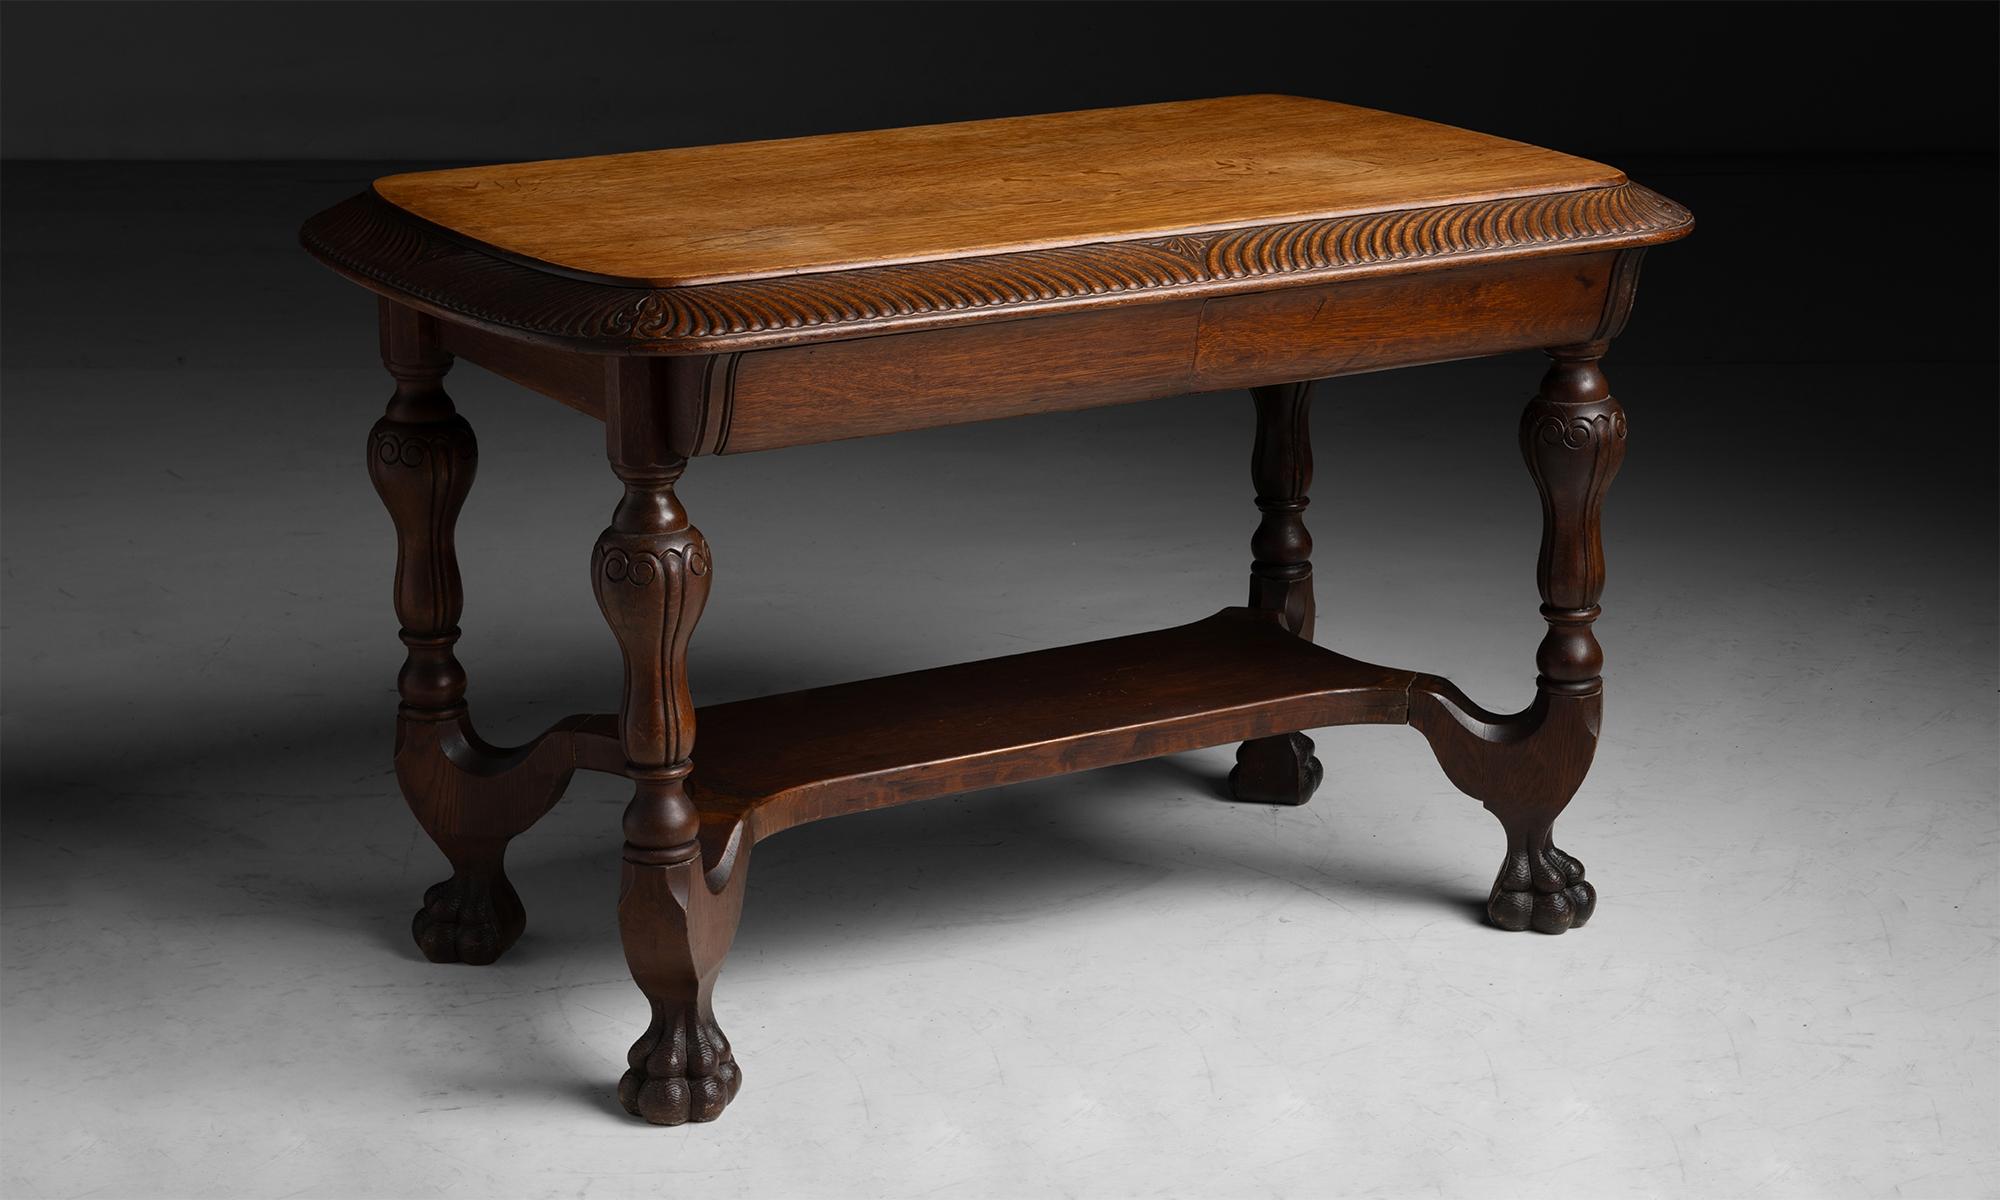 Carved Oak Desk
England circa 1920

Detailed carving, with single drawer on both sides, lower shelf and lion feet.

48.25”L x 30”d x 31”h
Ref. TABLE1191